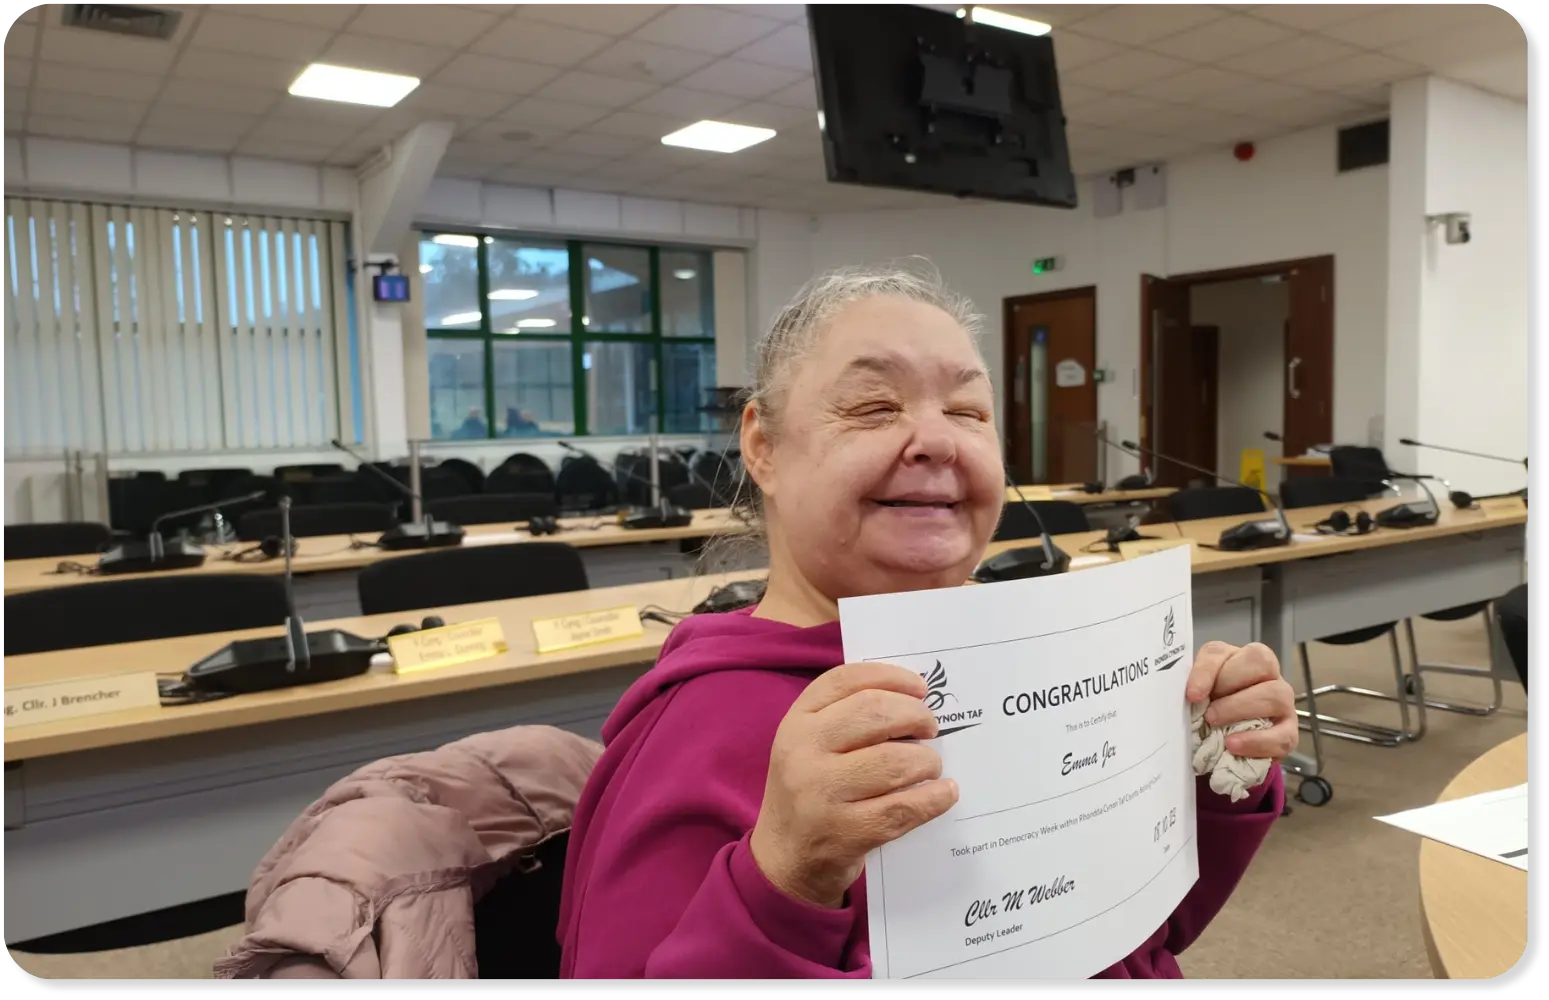 Emma smiling with a certificate from Rhondda Cynon Taf, attending a session about voting with a learning disability